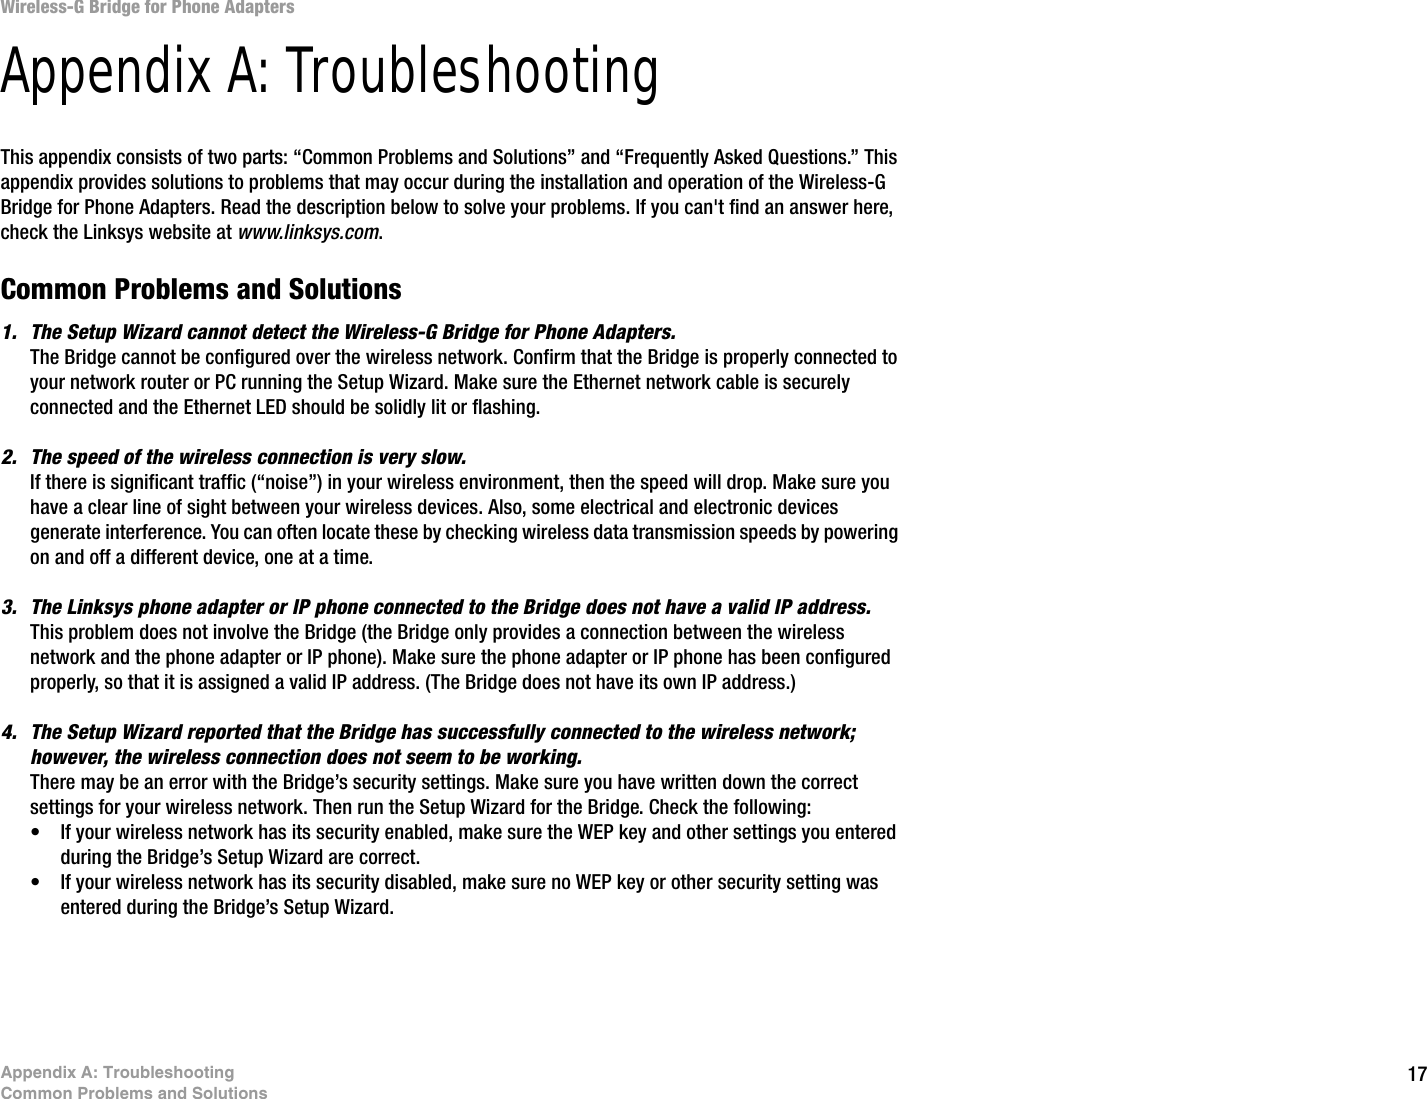 17Appendix A: TroubleshootingCommon Problems and SolutionsWireless-G Bridge for Phone AdaptersAppendix A: TroubleshootingThis appendix consists of two parts: “Common Problems and Solutions” and “Frequently Asked Questions.” This appendix provides solutions to problems that may occur during the installation and operation of the Wireless-G Bridge for Phone Adapters. Read the description below to solve your problems. If you can&apos;t find an answer here, check the Linksys website at www.linksys.com.Common Problems and Solutions1. The Setup Wizard cannot detect the Wireless-G Bridge for Phone Adapters.The Bridge cannot be configured over the wireless network. Confirm that the Bridge is properly connected to your network router or PC running the Setup Wizard. Make sure the Ethernet network cable is securely connected and the Ethernet LED should be solidly lit or flashing.2. The speed of the wireless connection is very slow.If there is significant traffic (“noise”) in your wireless environment, then the speed will drop. Make sure you have a clear line of sight between your wireless devices. Also, some electrical and electronic devices generate interference. You can often locate these by checking wireless data transmission speeds by powering on and off a different device, one at a time.3. The Linksys phone adapter or IP phone connected to the Bridge does not have a valid IP address.This problem does not involve the Bridge (the Bridge only provides a connection between the wireless network and the phone adapter or IP phone). Make sure the phone adapter or IP phone has been configured properly, so that it is assigned a valid IP address. (The Bridge does not have its own IP address.)4. The Setup Wizard reported that the Bridge has successfully connected to the wireless network; however, the wireless connection does not seem to be working.There may be an error with the Bridge’s security settings. Make sure you have written down the correct settings for your wireless network. Then run the Setup Wizard for the Bridge. Check the following:• If your wireless network has its security enabled, make sure the WEP key and other settings you entered during the Bridge’s Setup Wizard are correct.• If your wireless network has its security disabled, make sure no WEP key or other security setting was entered during the Bridge’s Setup Wizard.